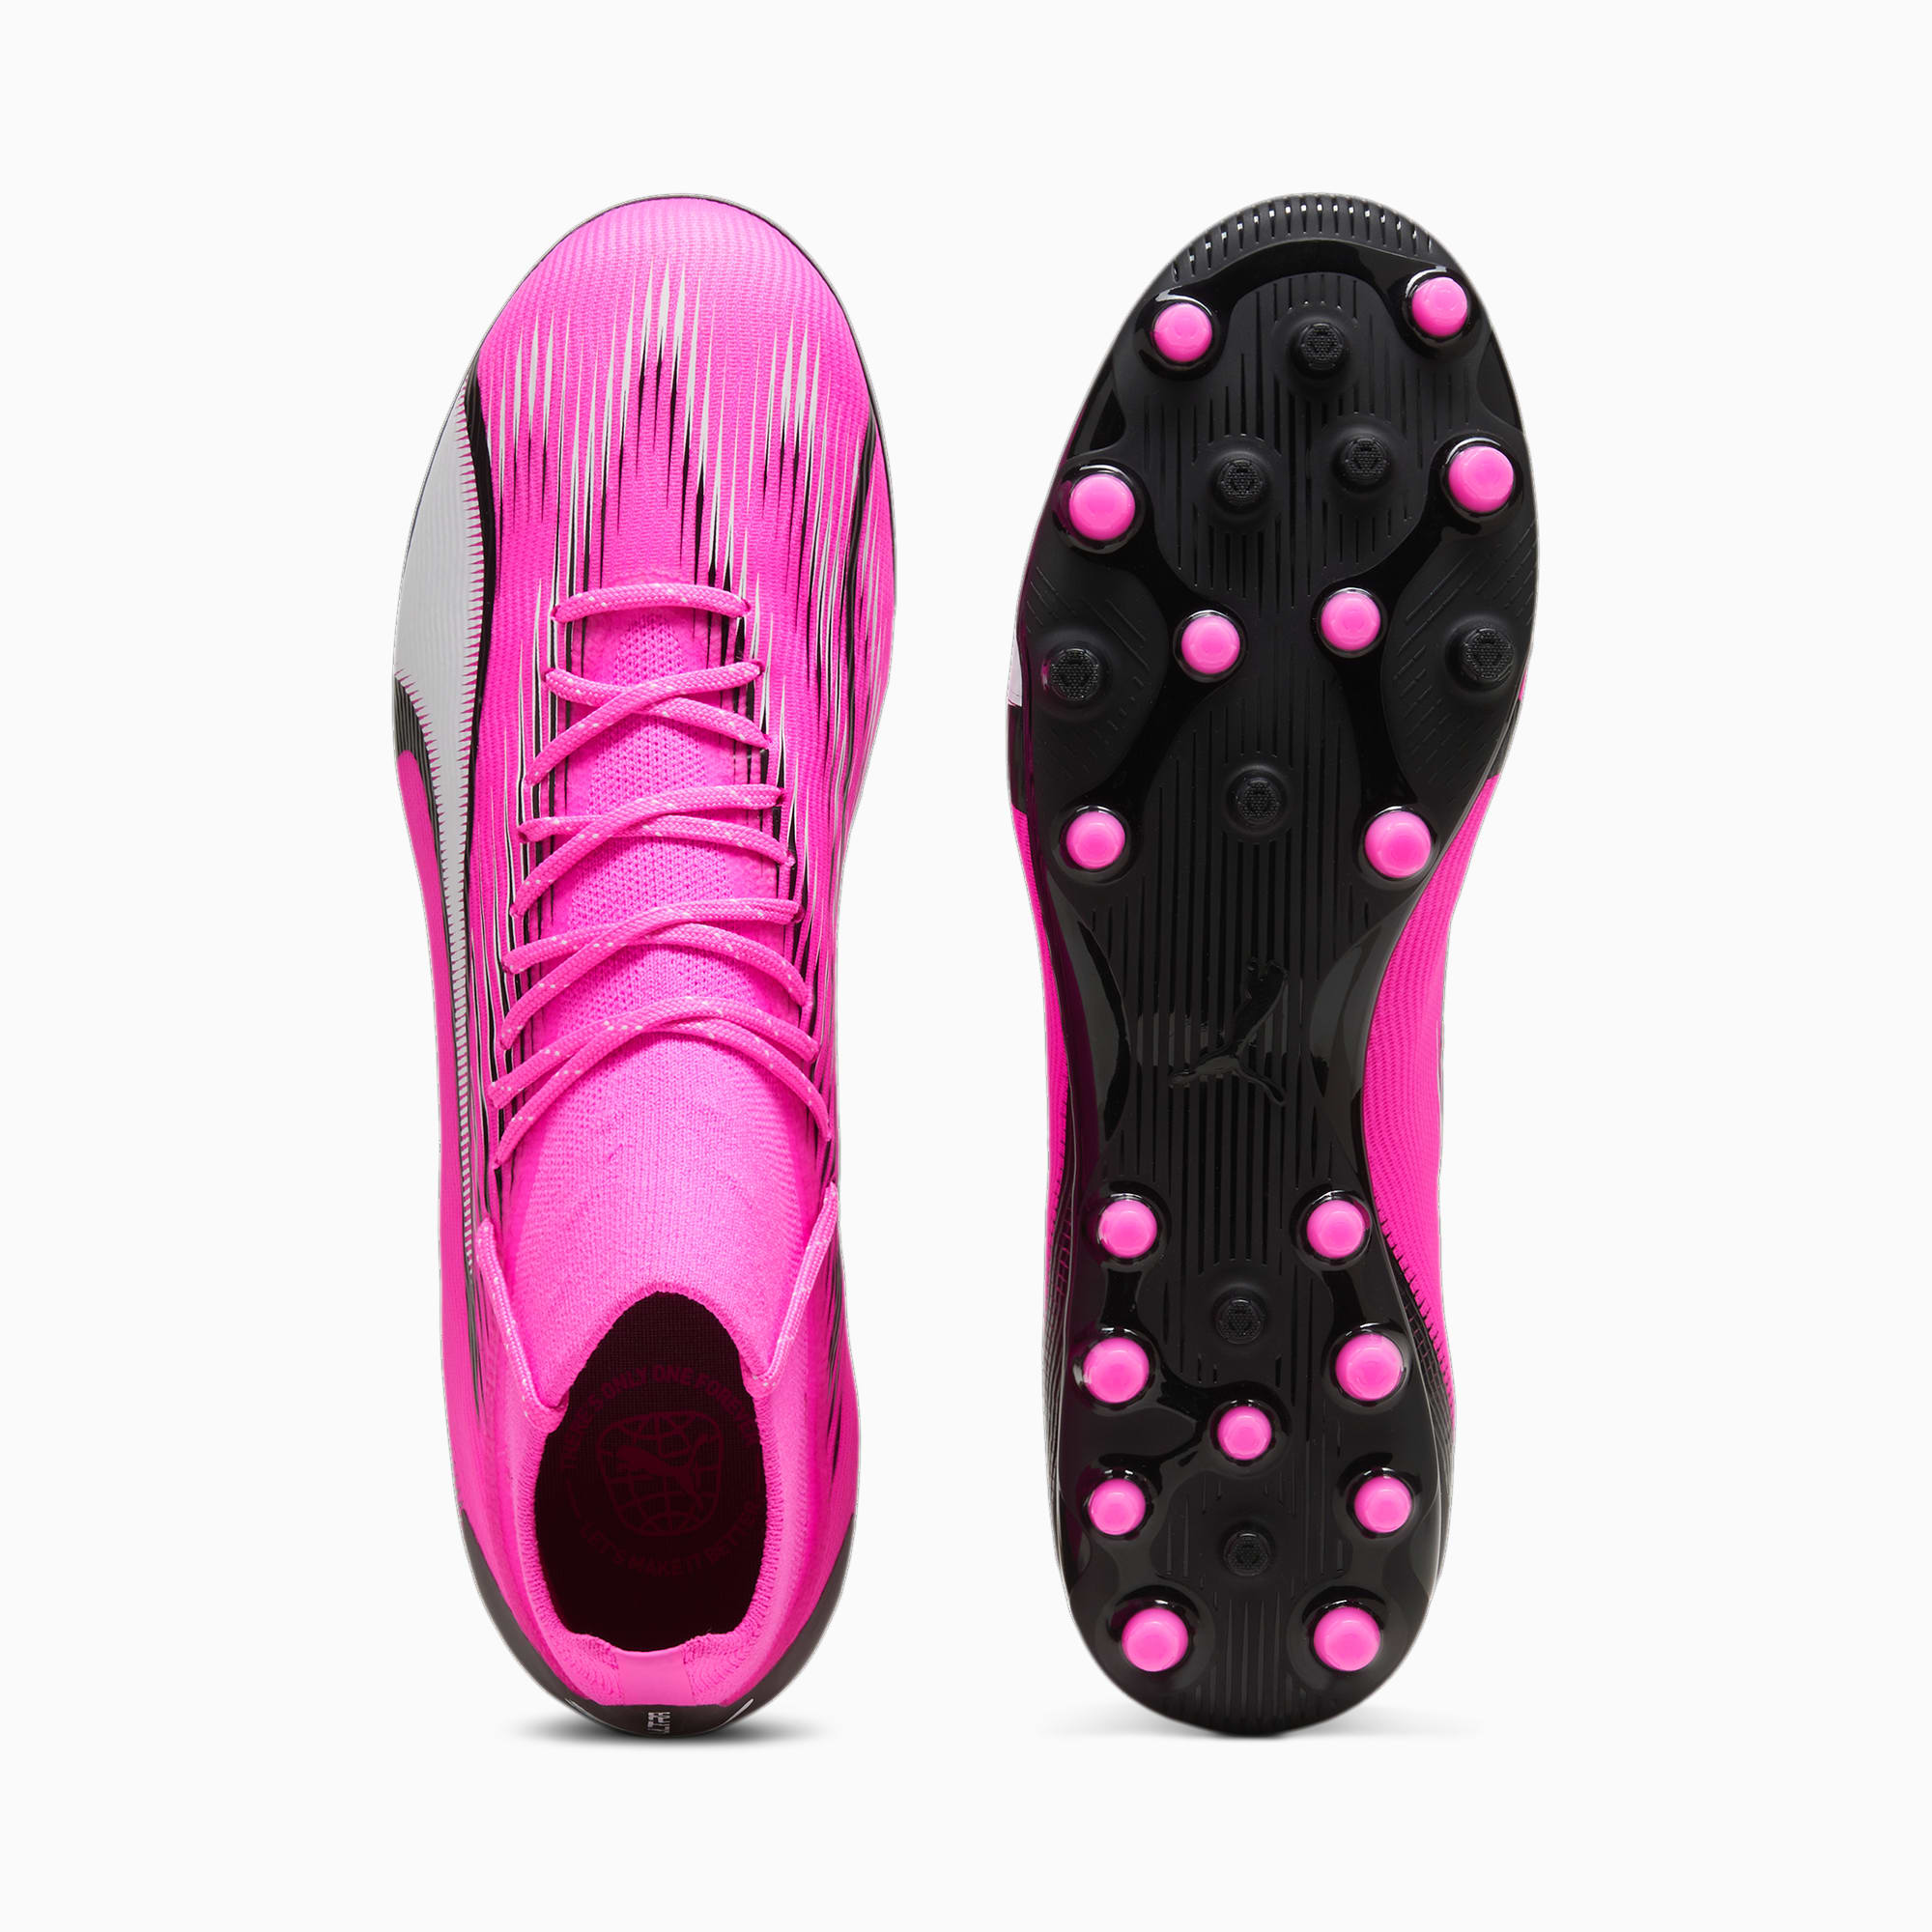 Men's PUMA Ultra Pro MG Football Boots, Poison Pink/White/Black, Size 39, Shoes